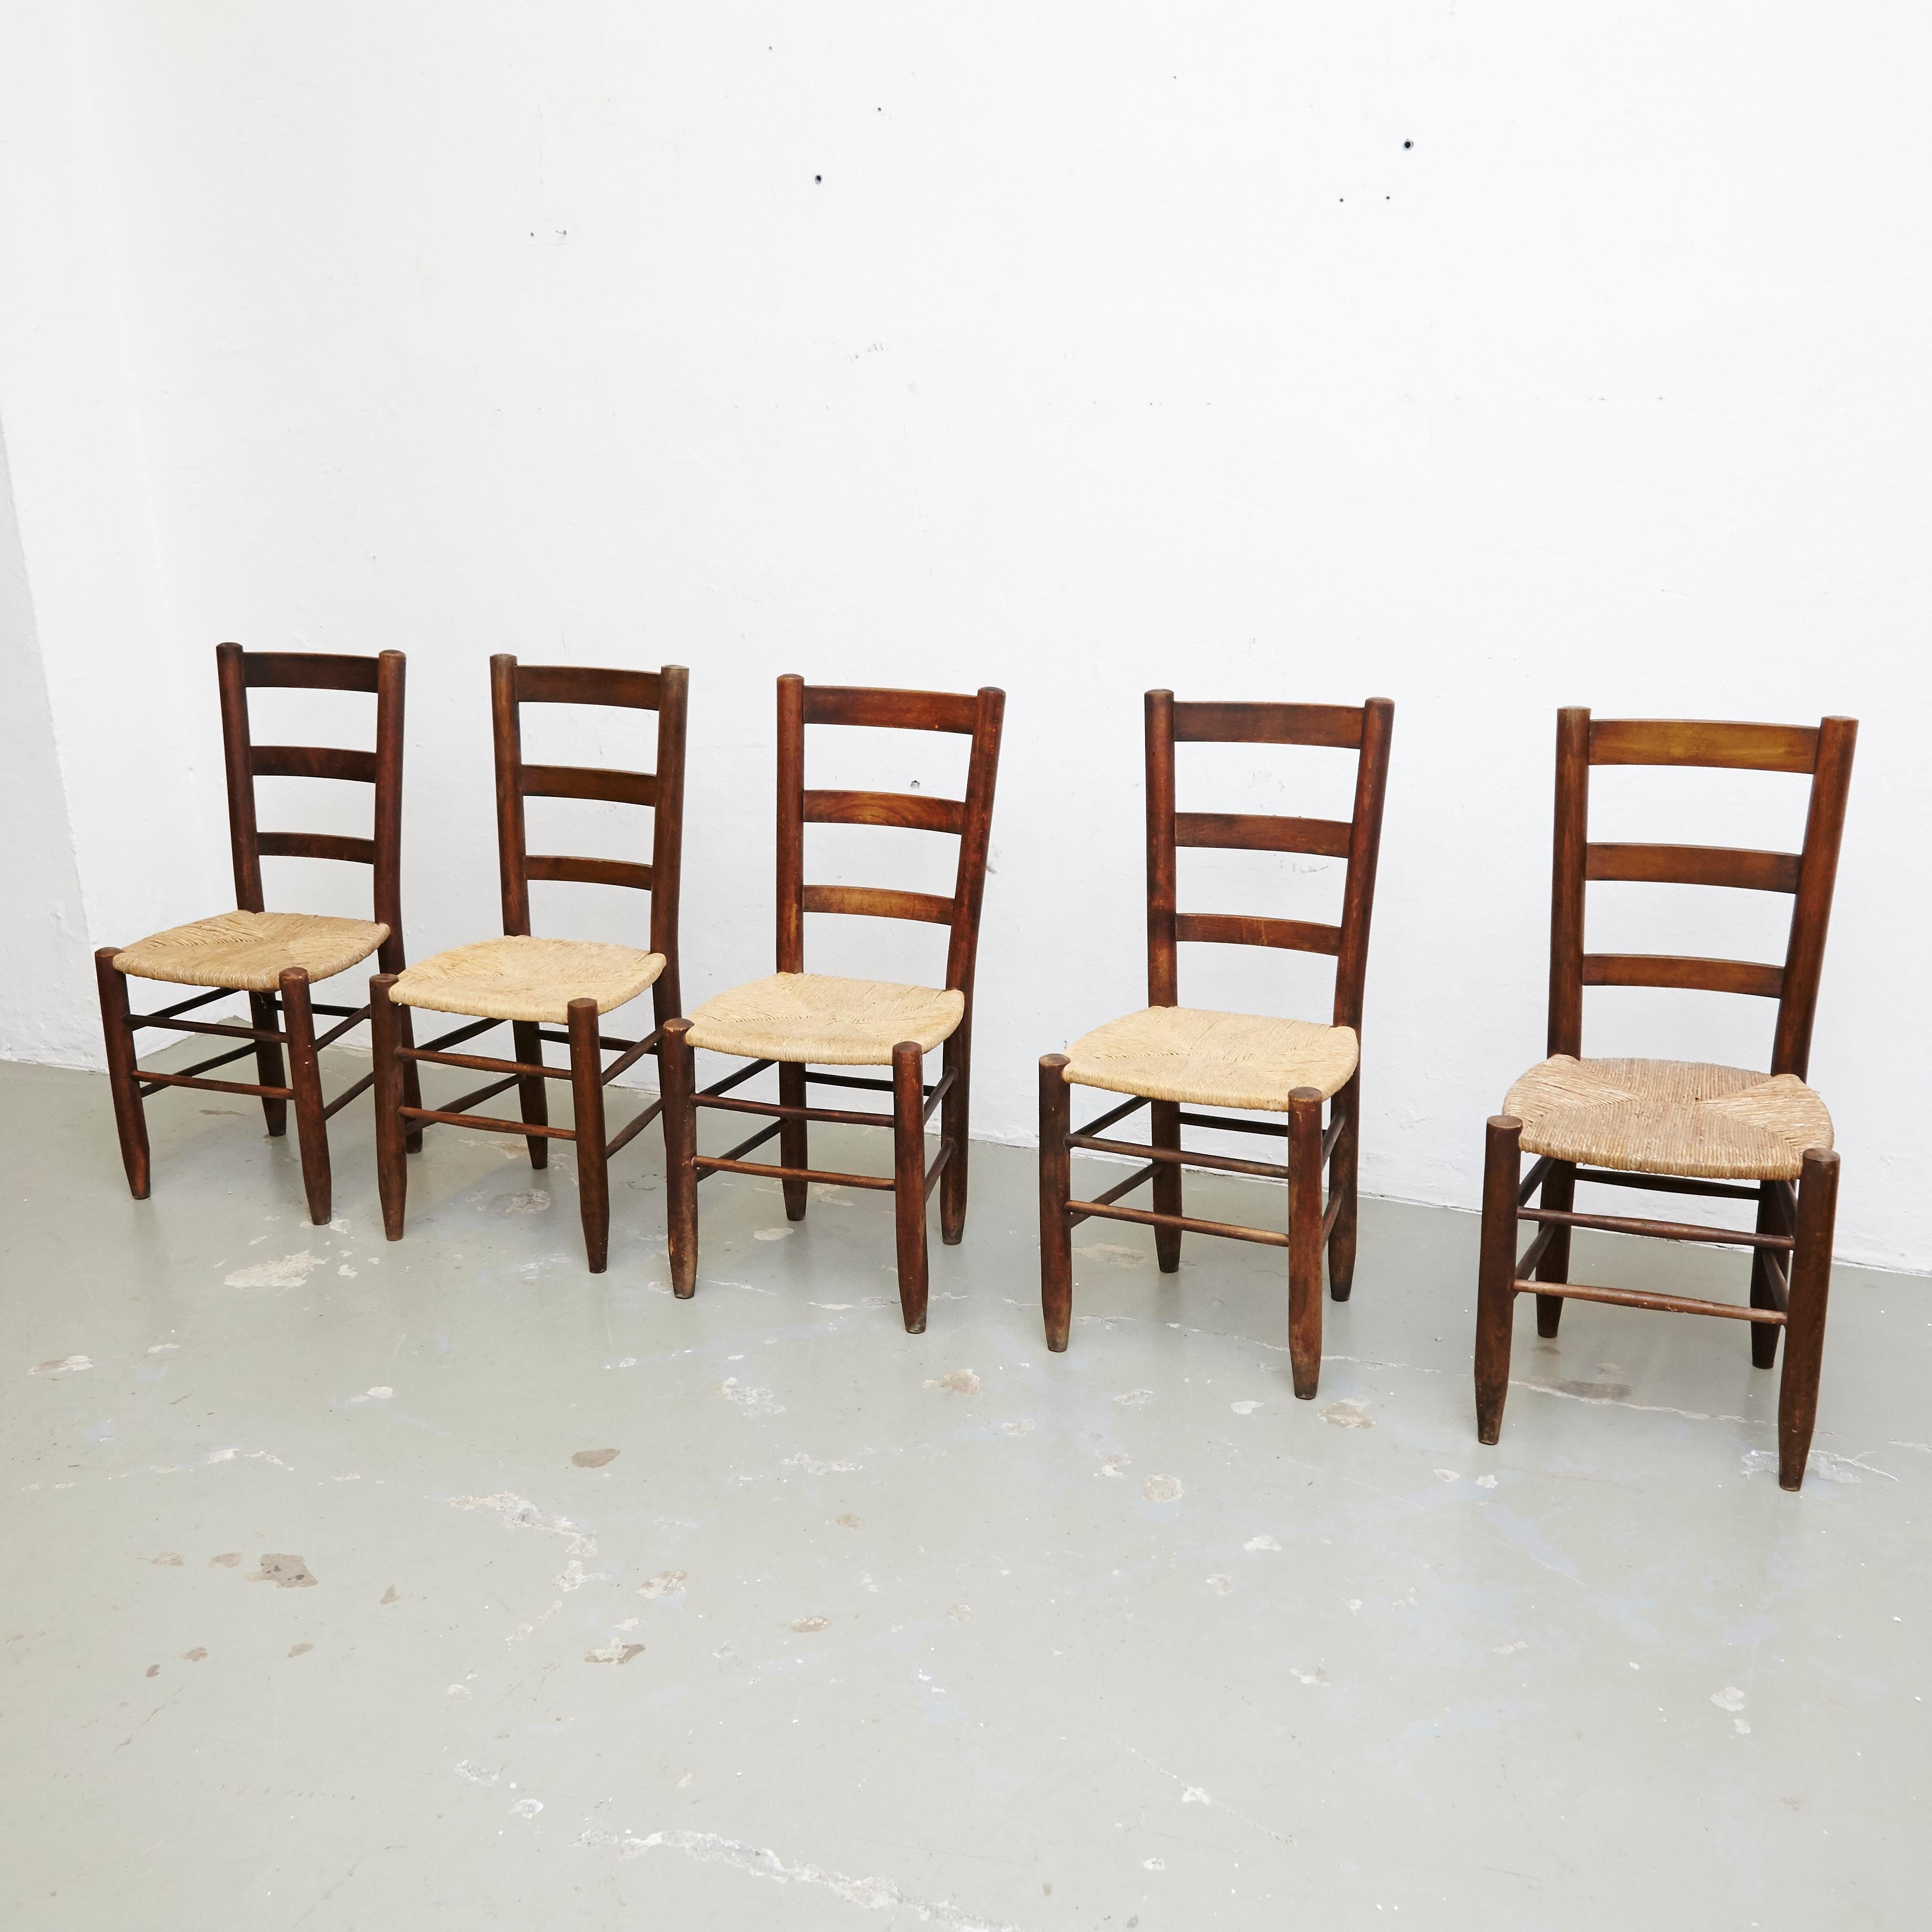 Set of ten dining chairs, model N19, designed by Charlotte Perriand, circa 1950.

Solid wood base and legs, and rush seat.

In original condition, with minor wear consistent with age and use, preserving a beautiful patina. The seats rush has